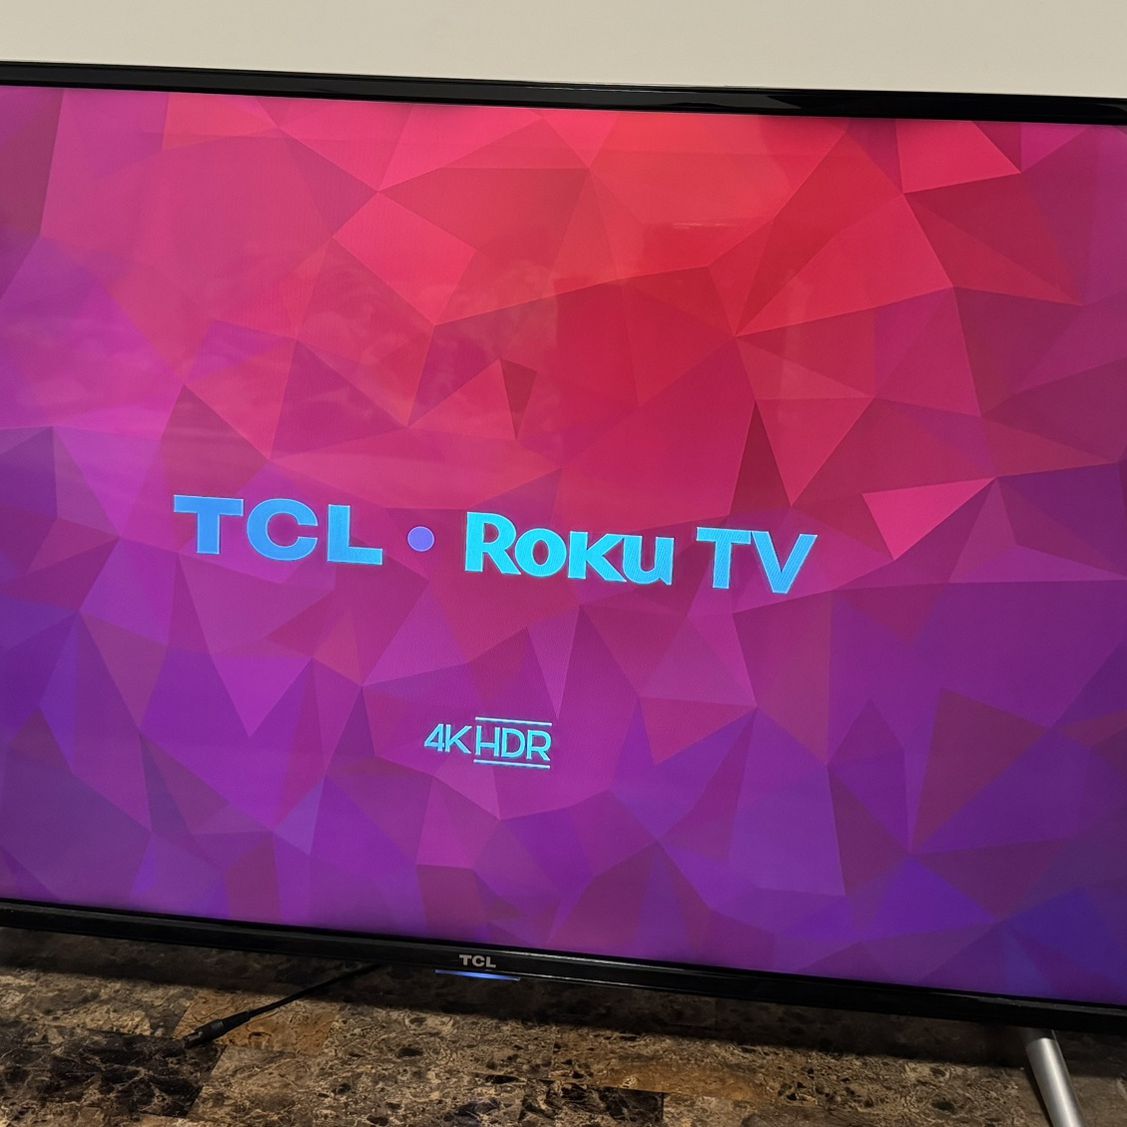 40” TCL Roku TV 4K HDR with Remote Control (NYC LOCAL PICK UP)